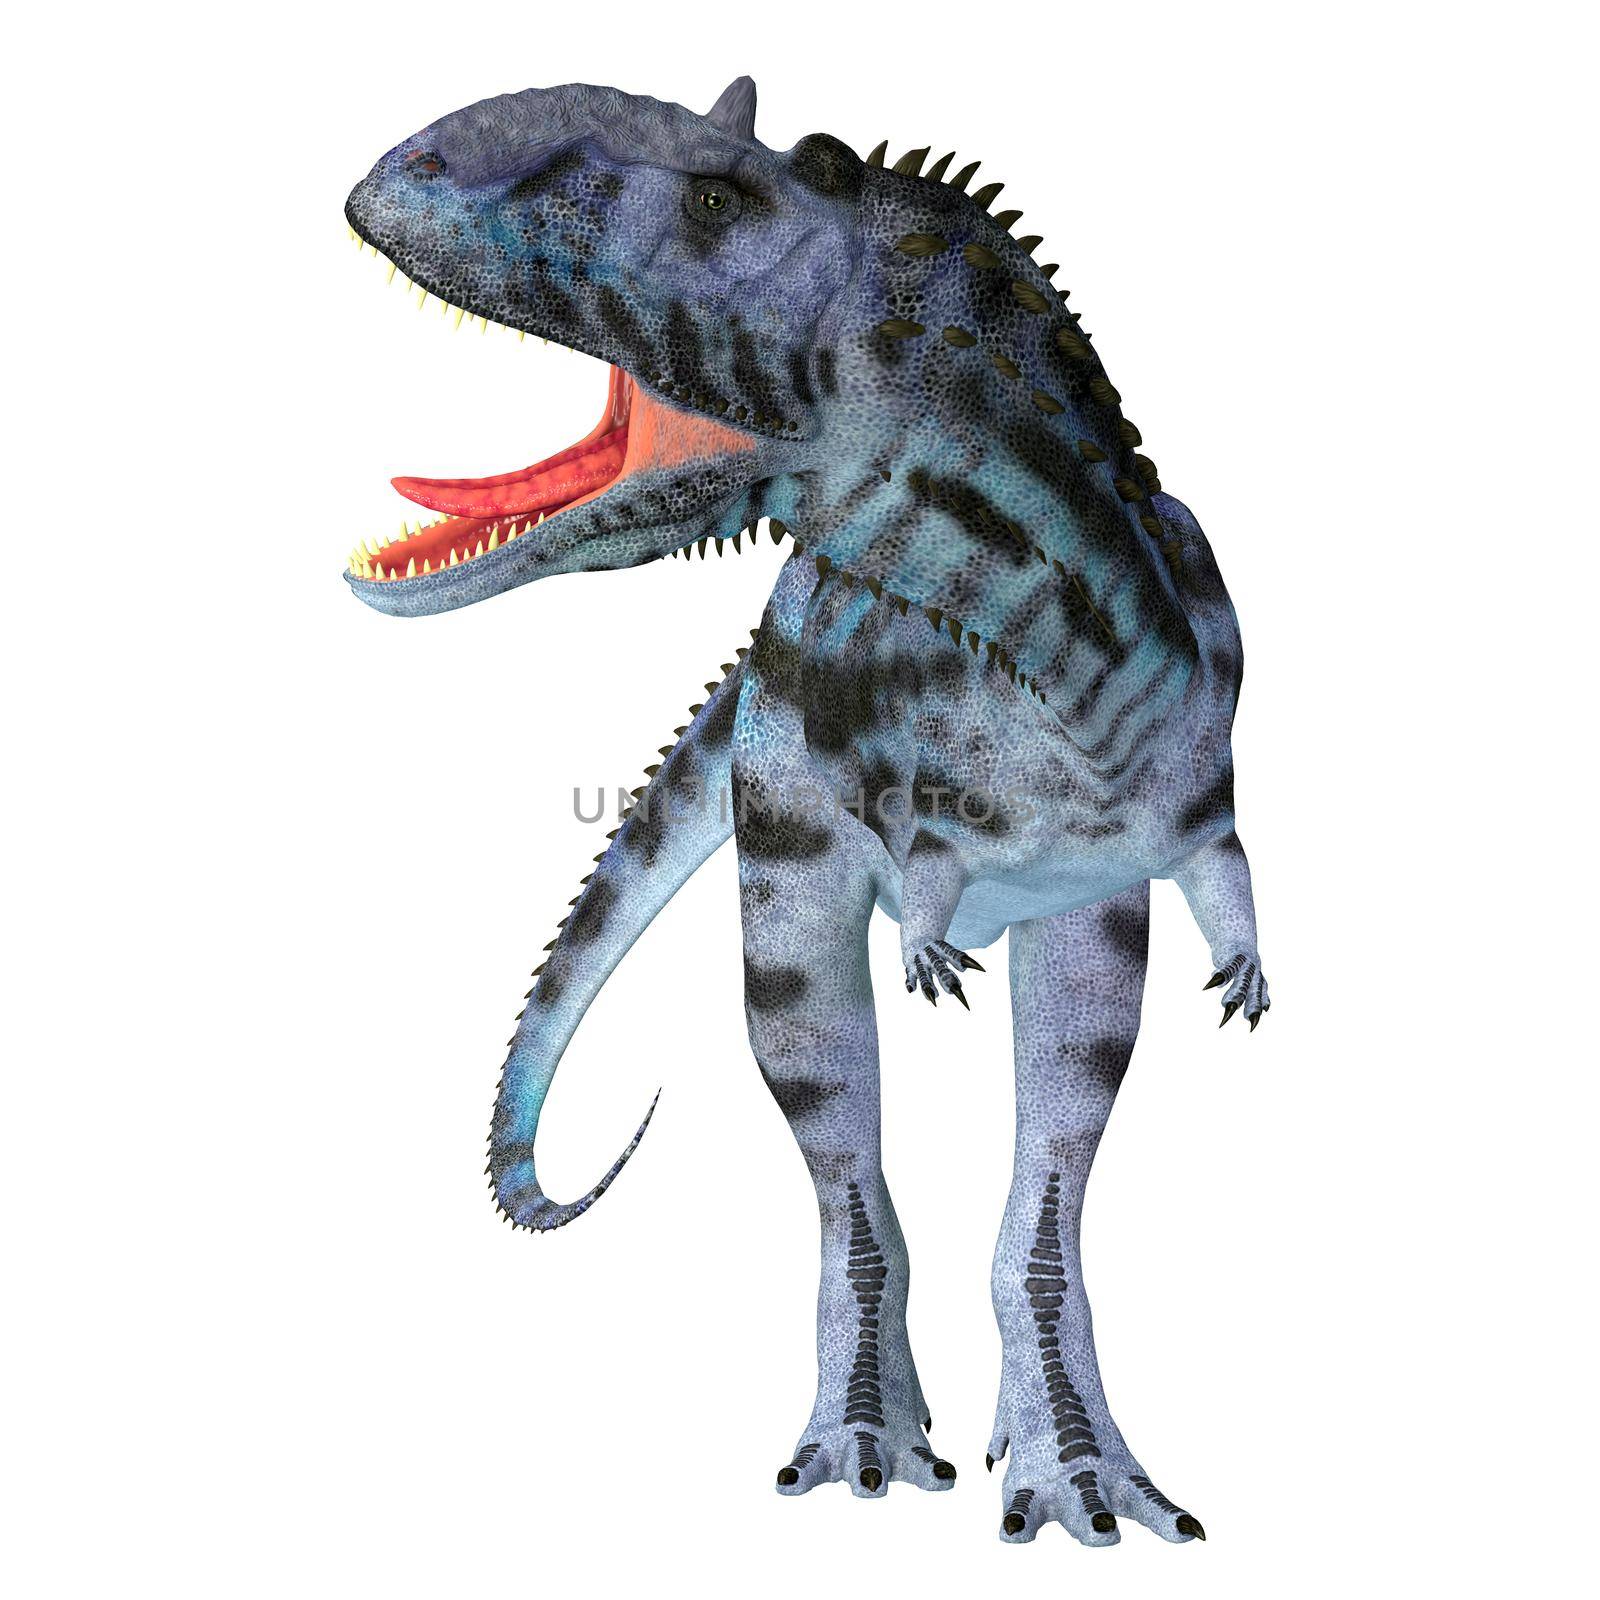 Majungasaurus was a carnivorous theropod dinosaur that lived in Madagascar during the Cretaceous Period.